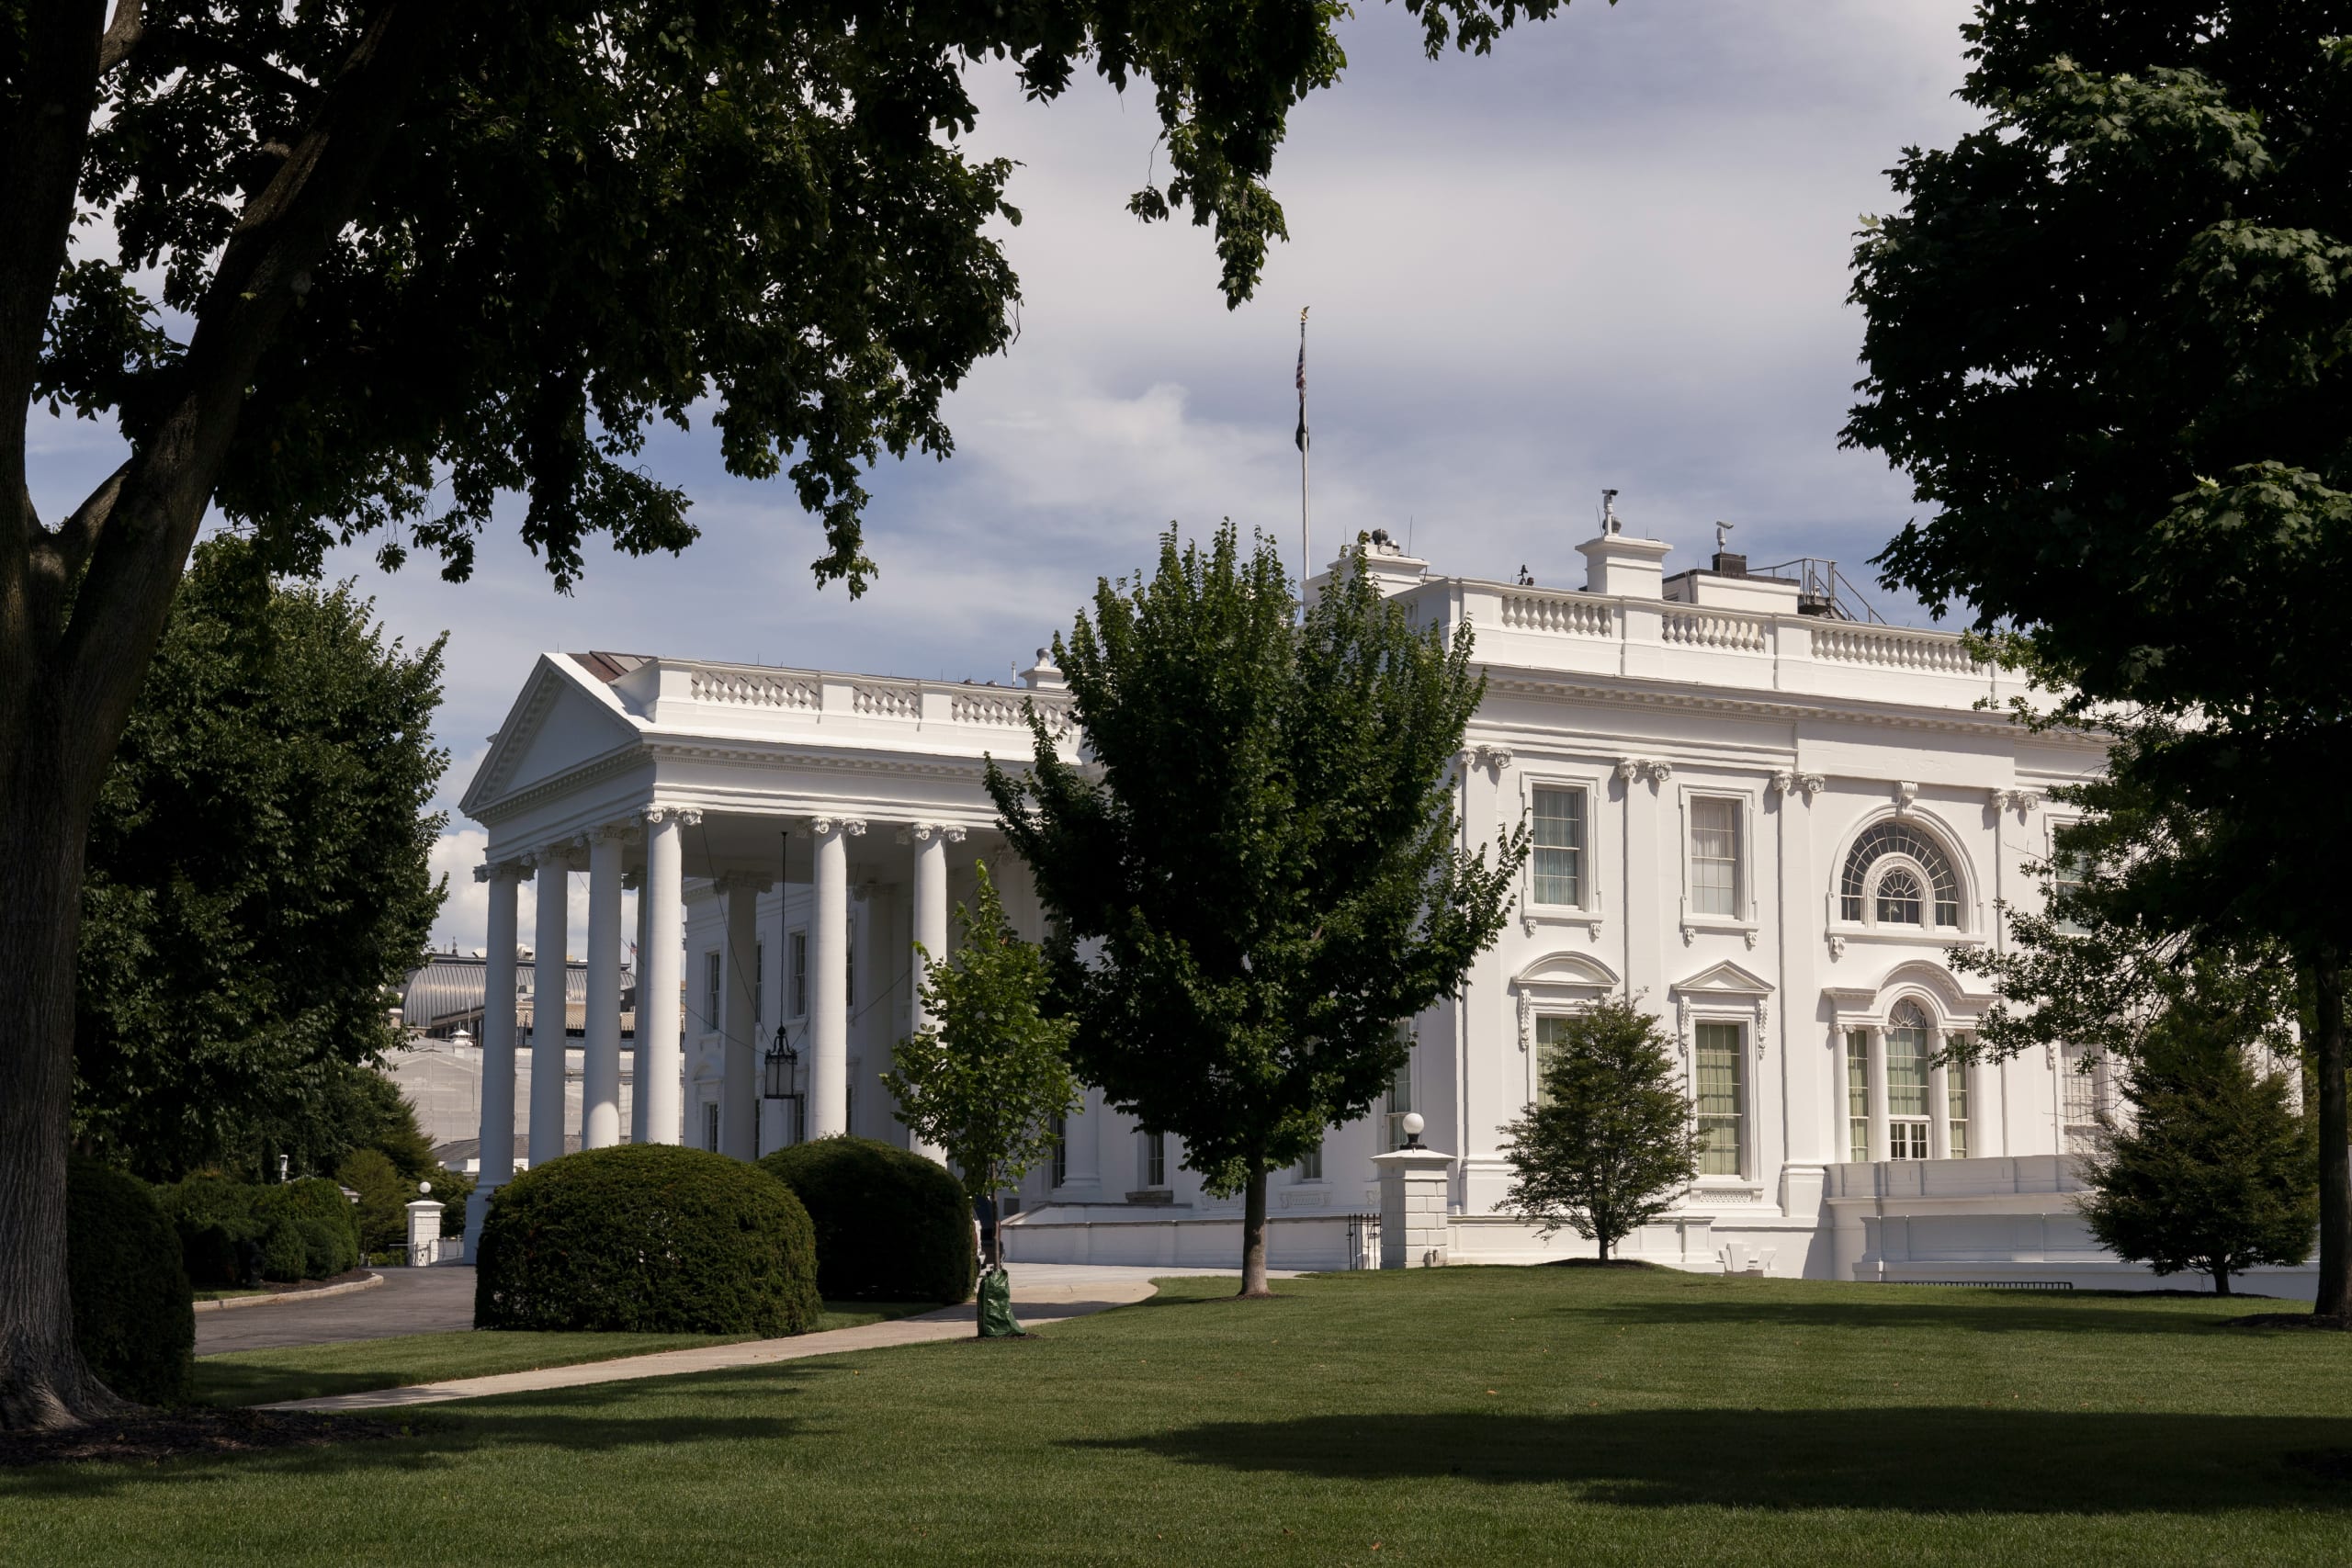 Cocaine found at White House causes evacuation